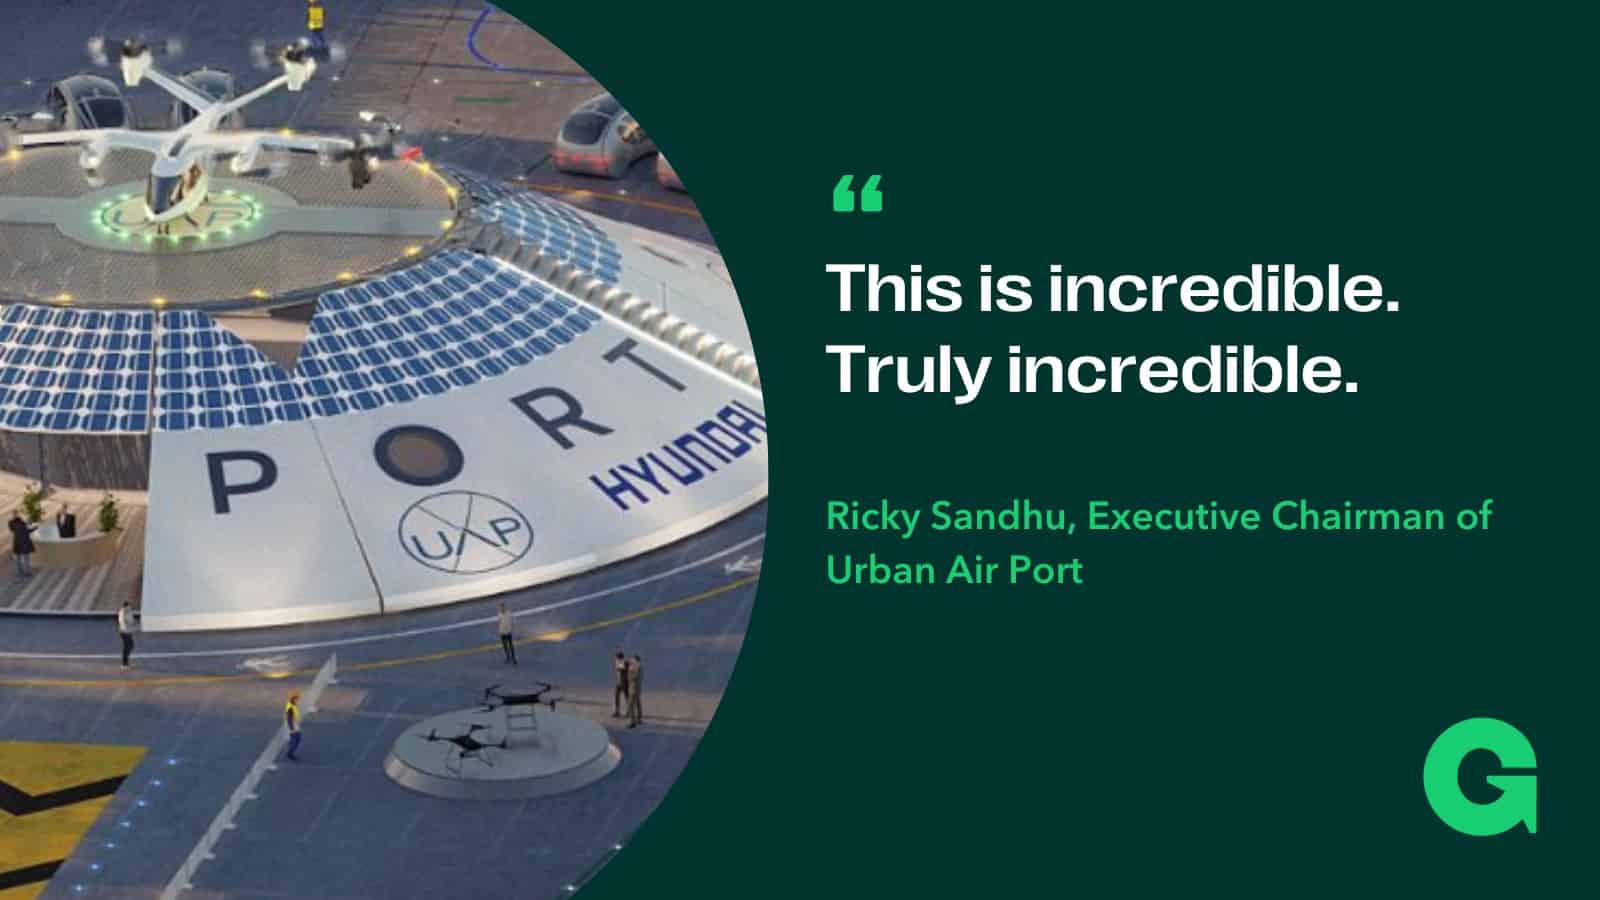 "This is incredible. Truly incredible." Ricky Sandhu, Executive Chairman of Urban Air Port